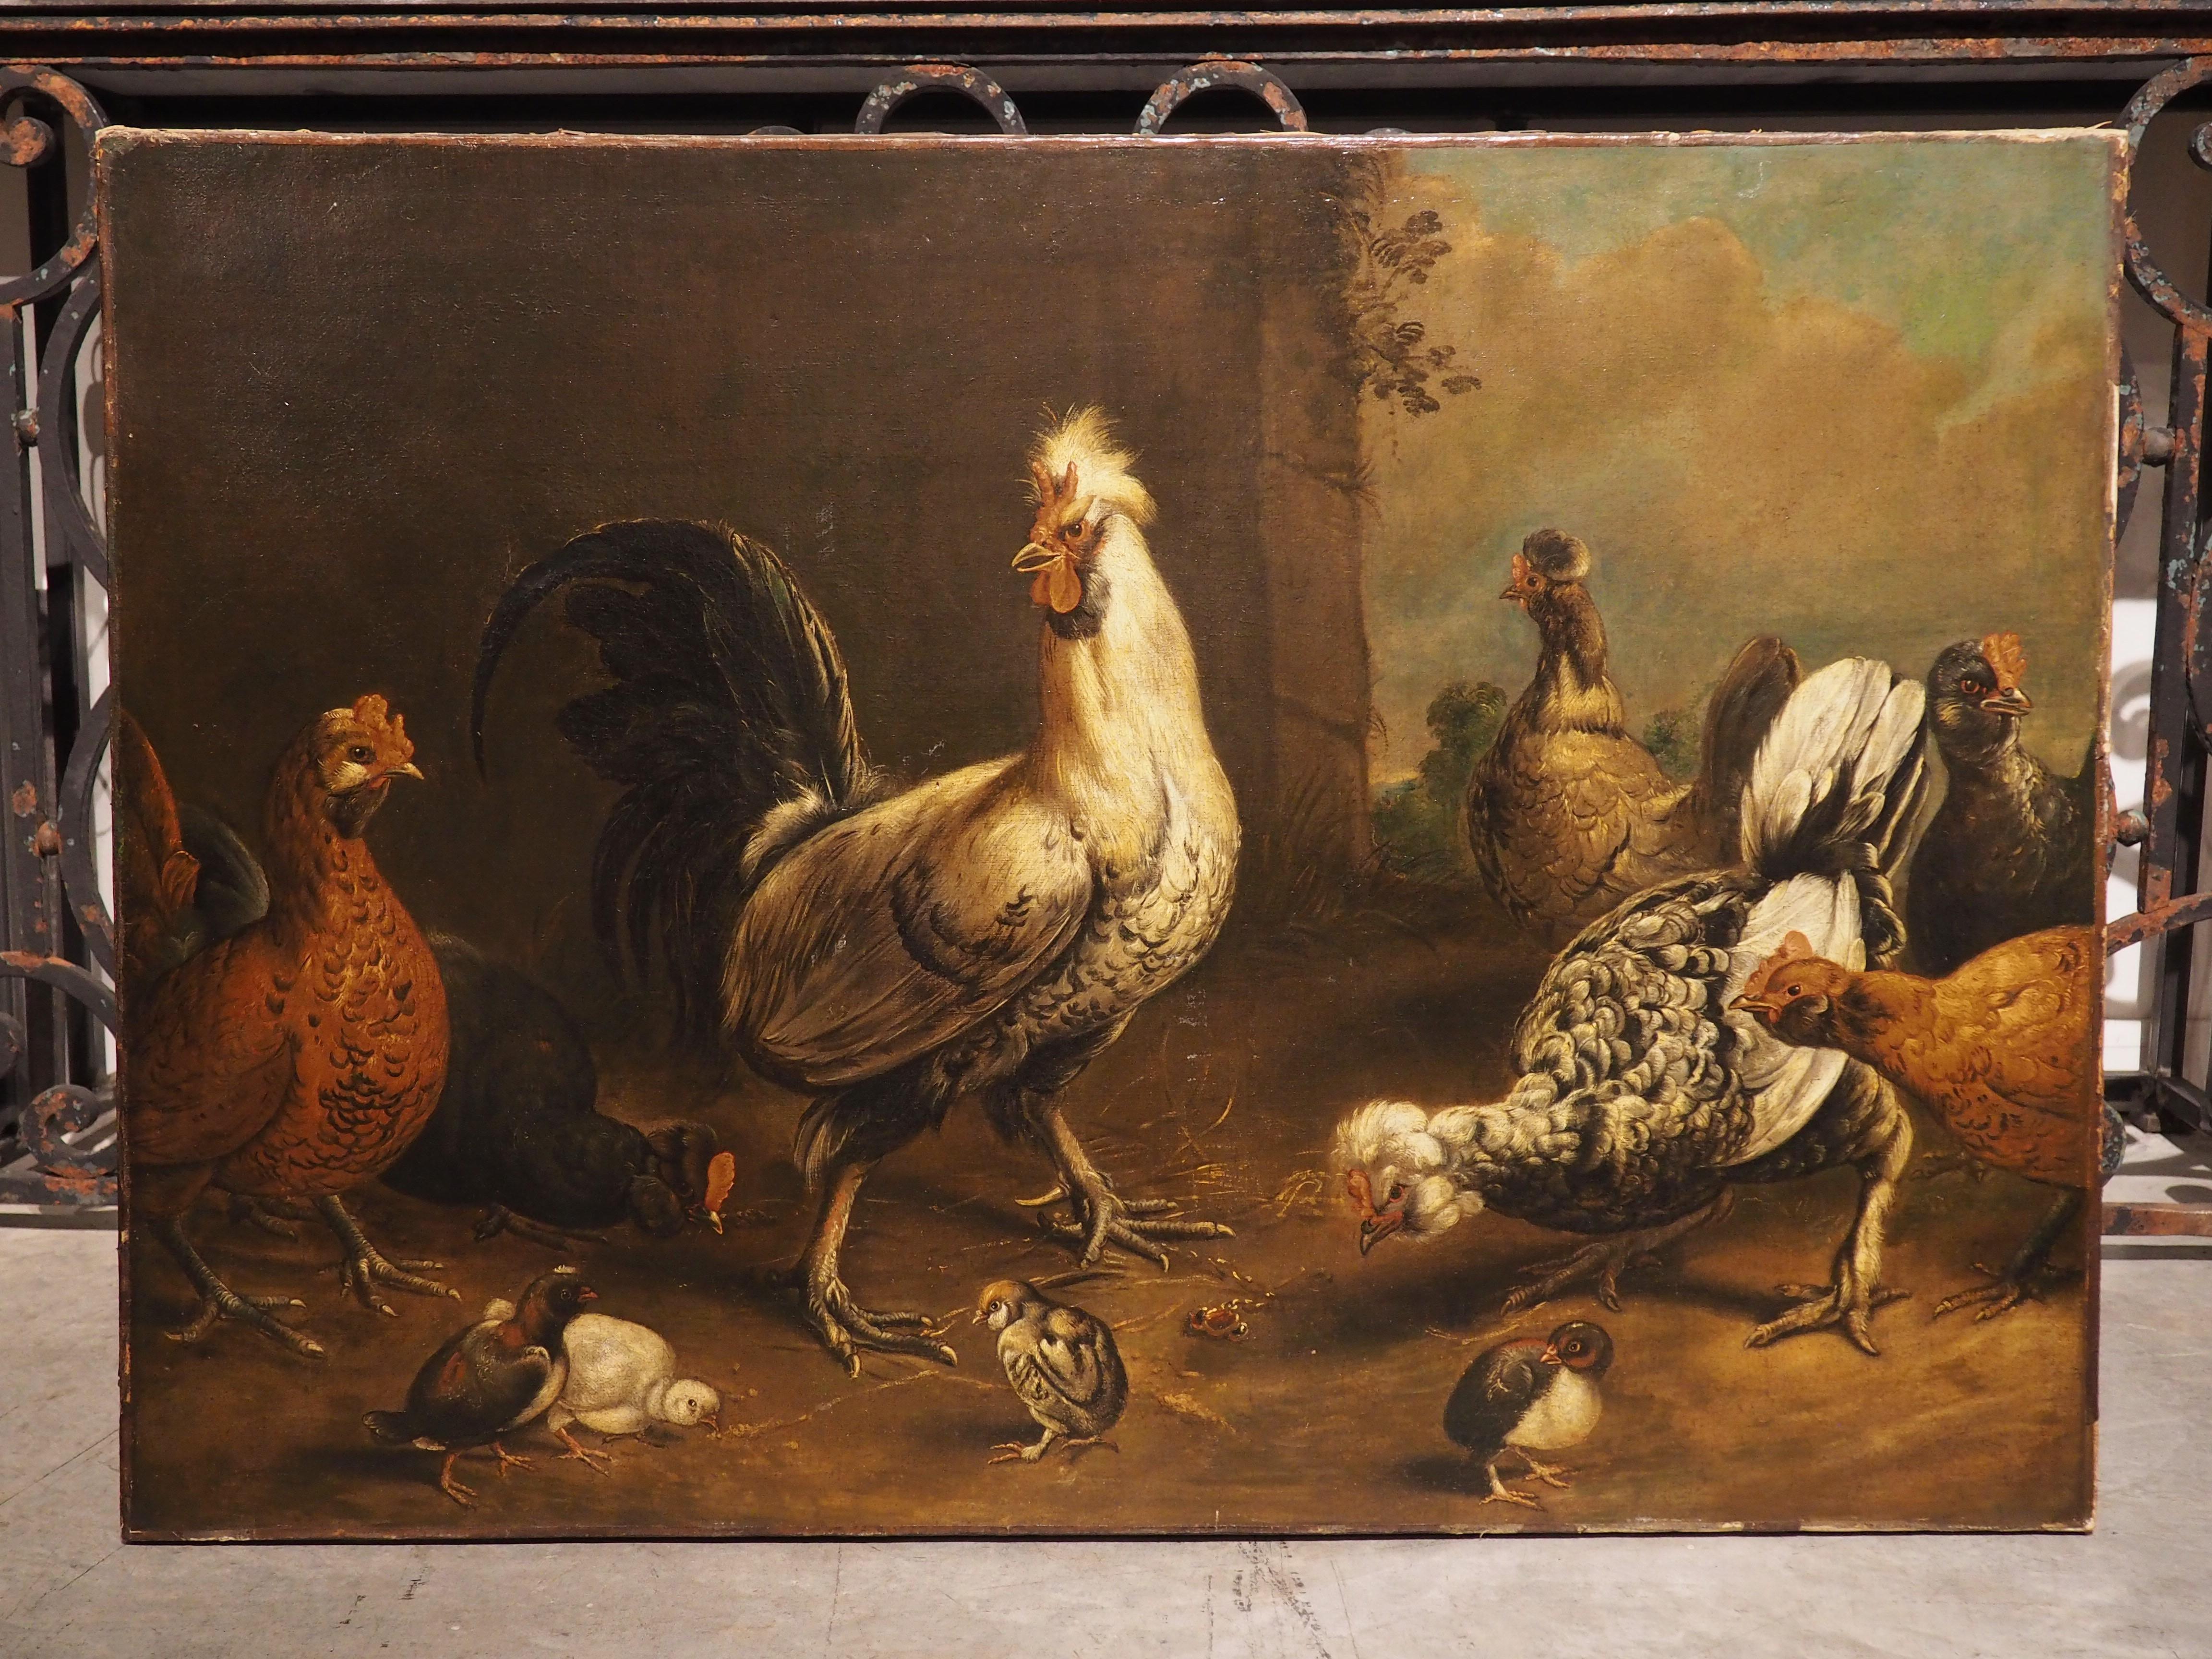 This painting of a flock of chickens from the Netherlands is attributed to the 17th century Dutch animalier painter, Melchior Hondecoeter (also cited as “d’Hondecoeter” or “de Hondecoeter”). The pastoral painting, depicting the chickens congregating